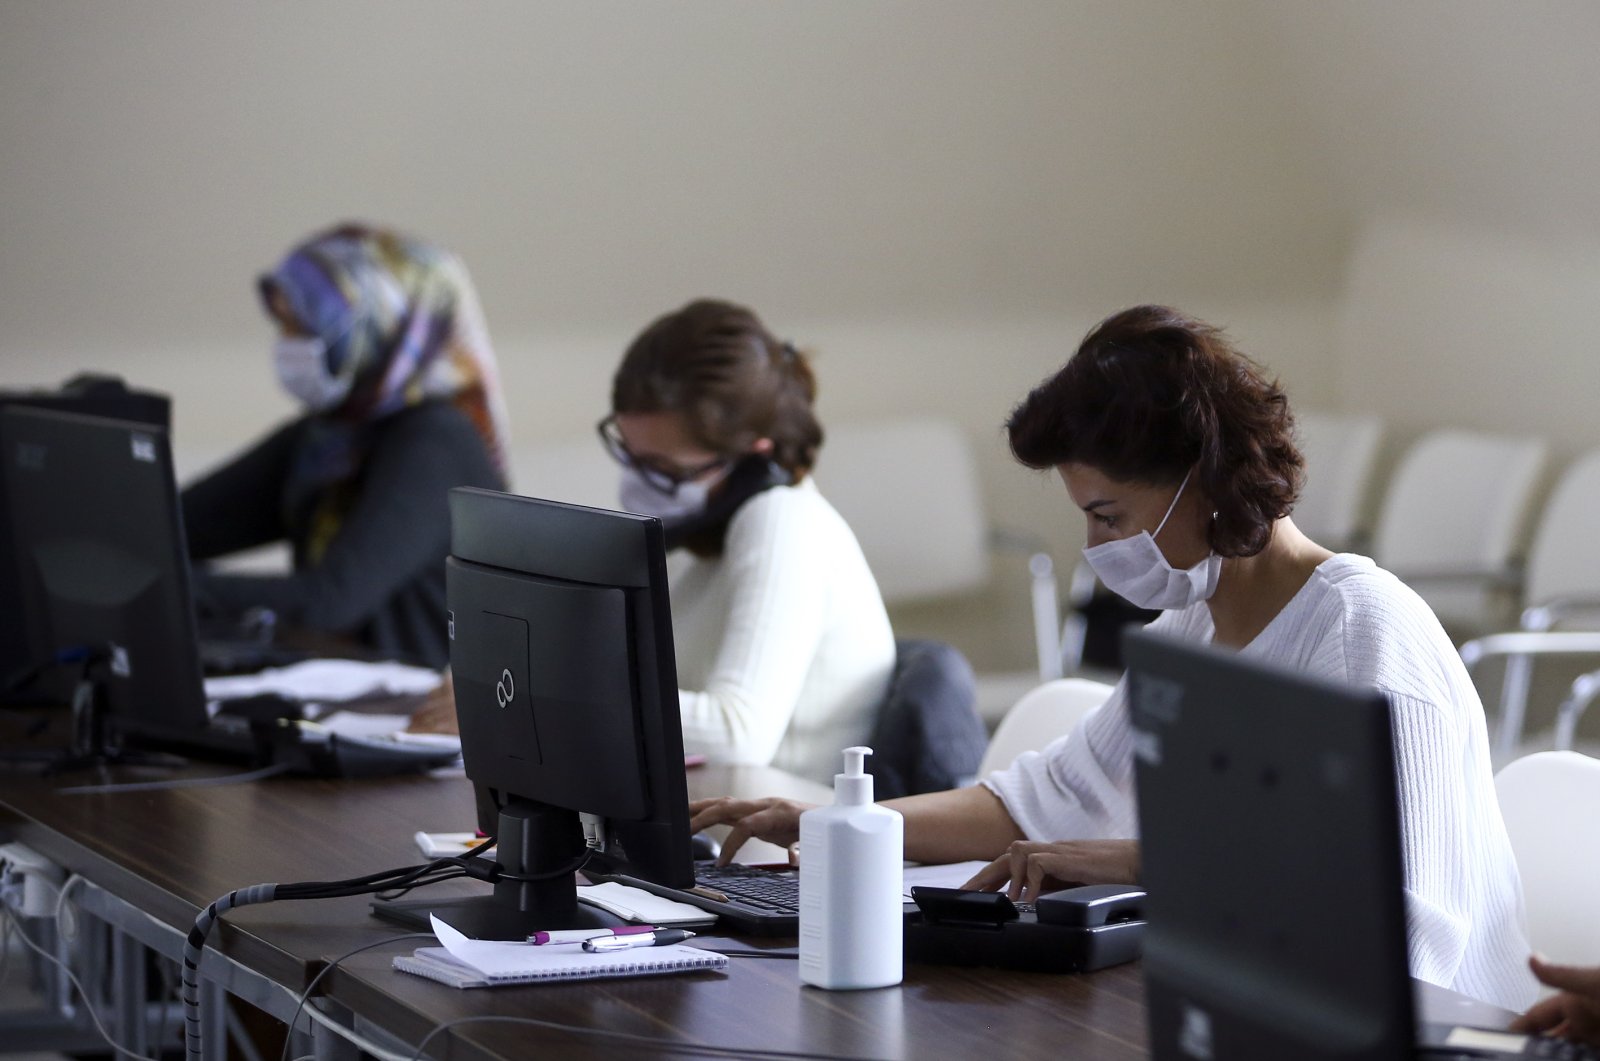 A team of health experts answers people’s calls regarding the COVID-19 outbreak at a call center set up by the Ministry of Health, Ankara, Turkey, April 15, 2020. (AA Photo)